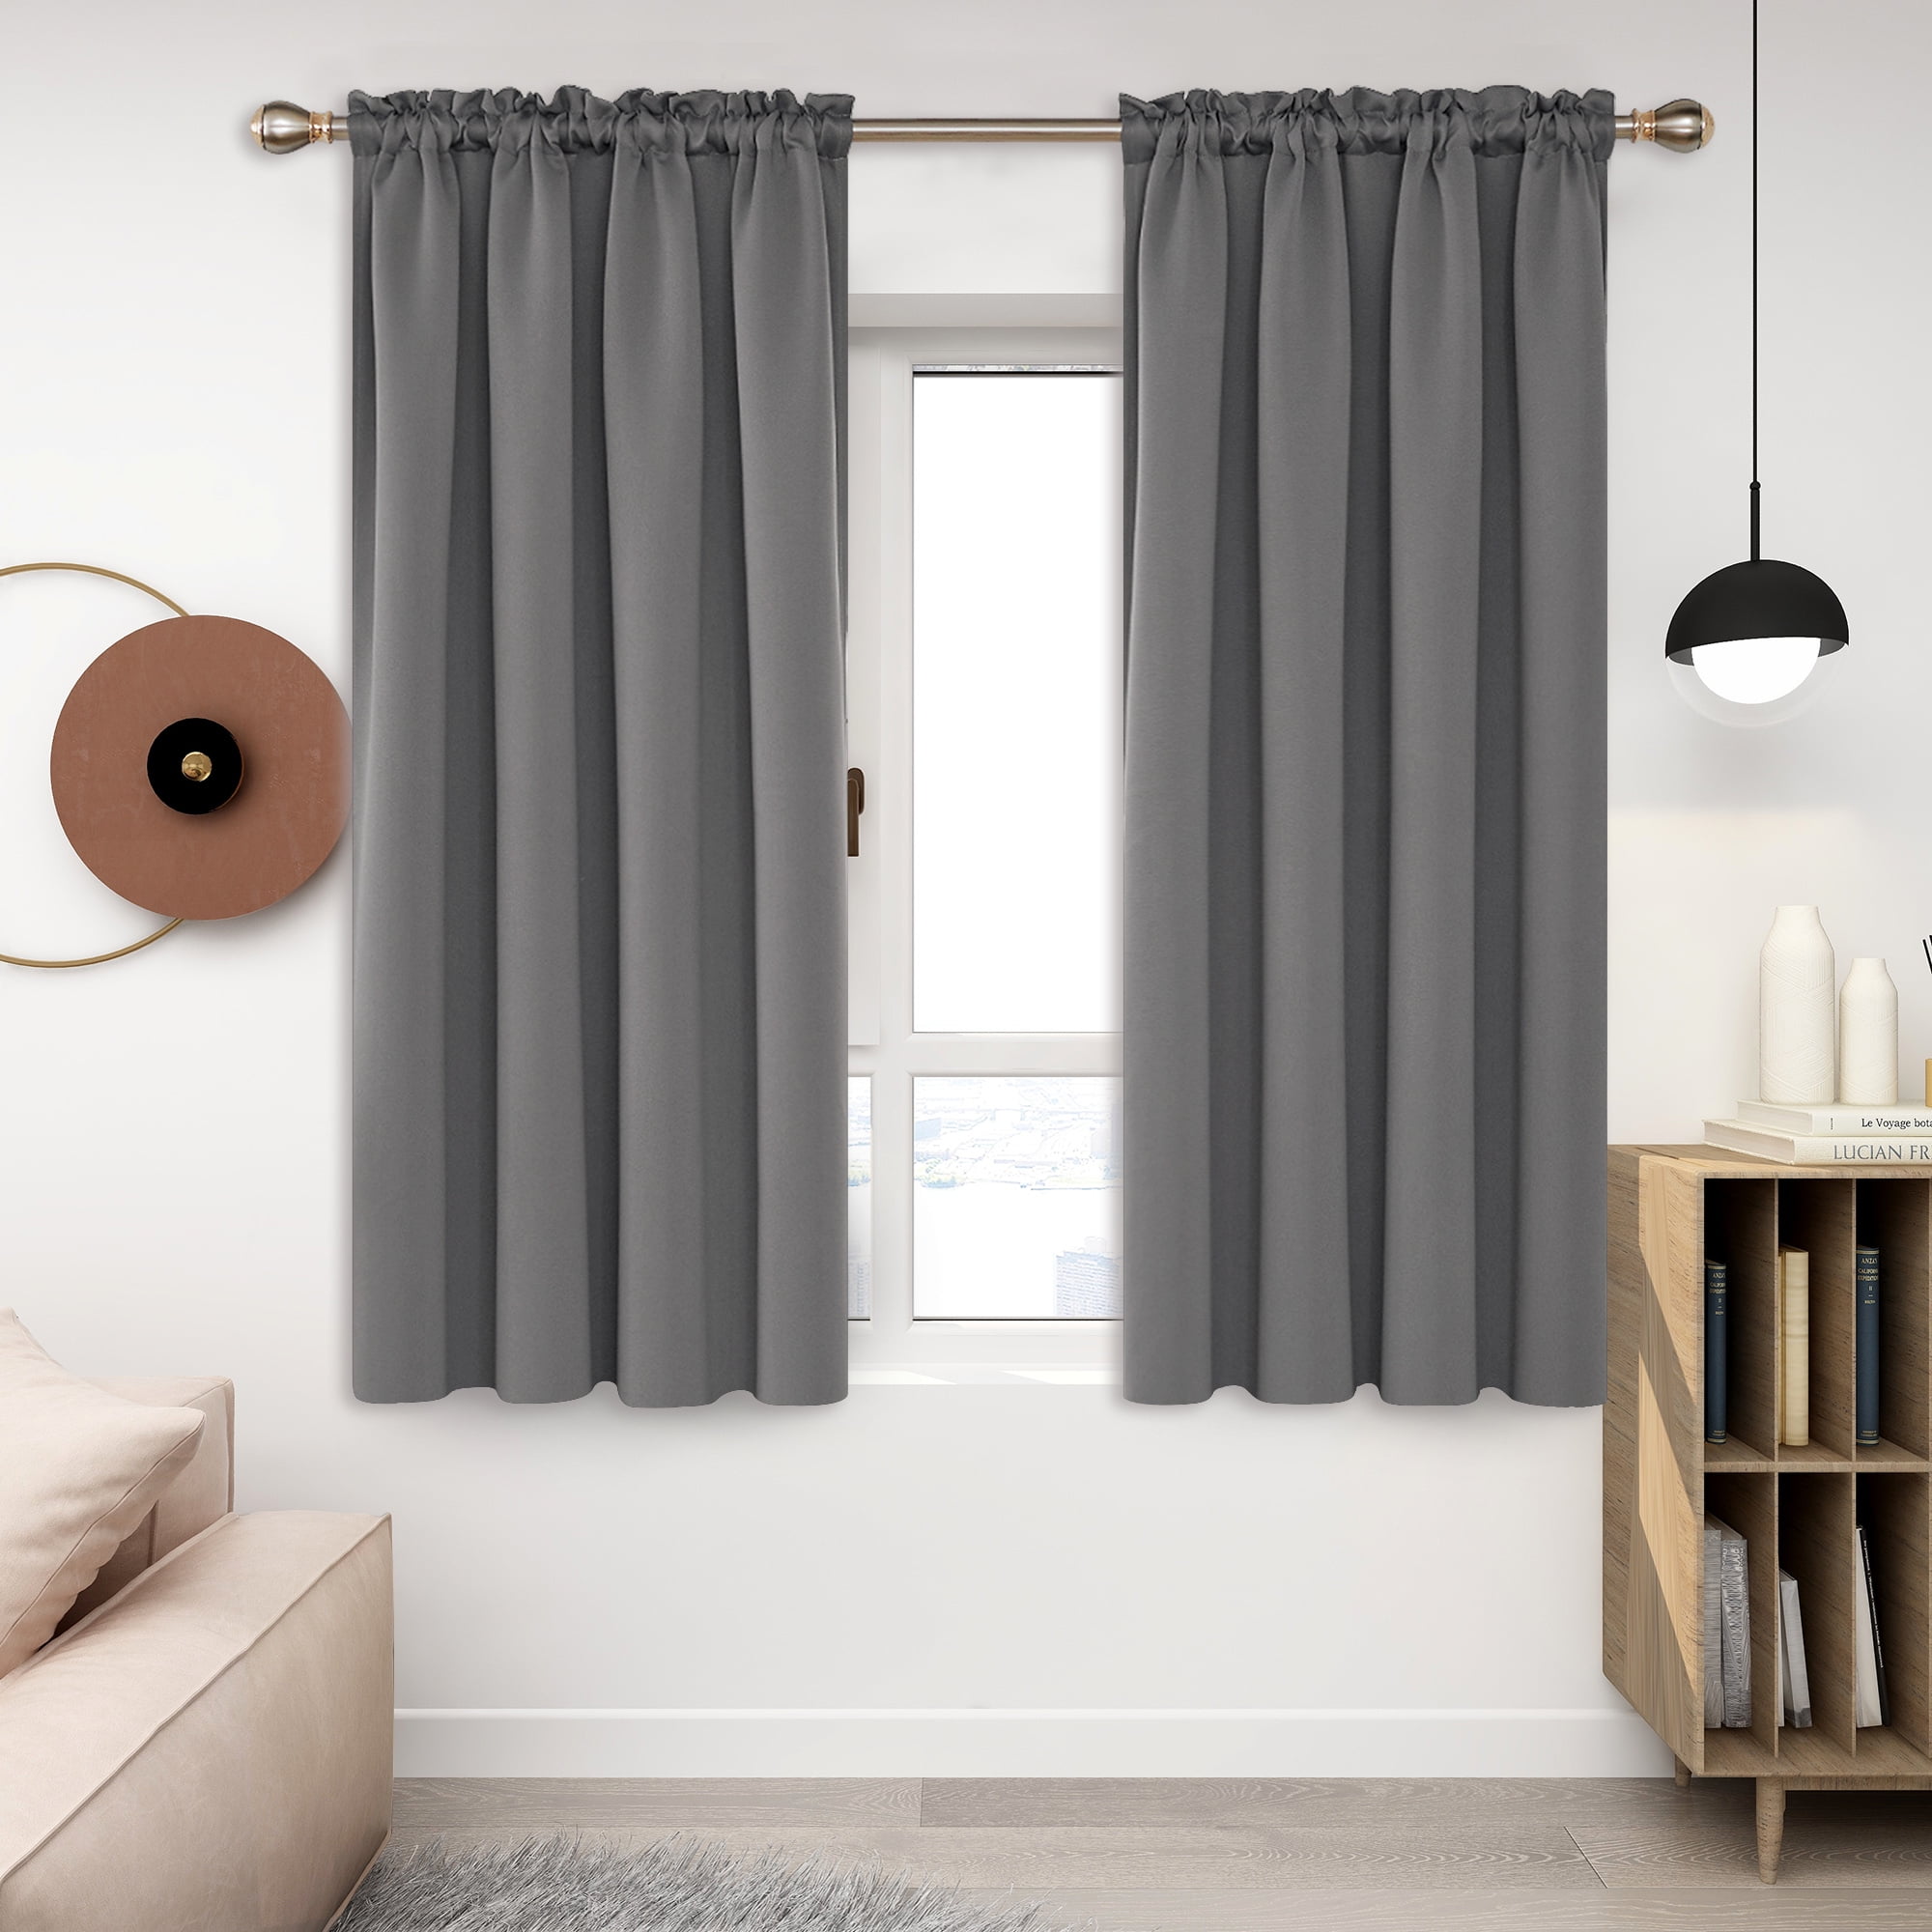 Room Darkening Bedroom Nursery Silver/ Light Grey Blackout Thermal Curtains Eyelet Ring Top 46 x 72 Inches 2 Pieces 